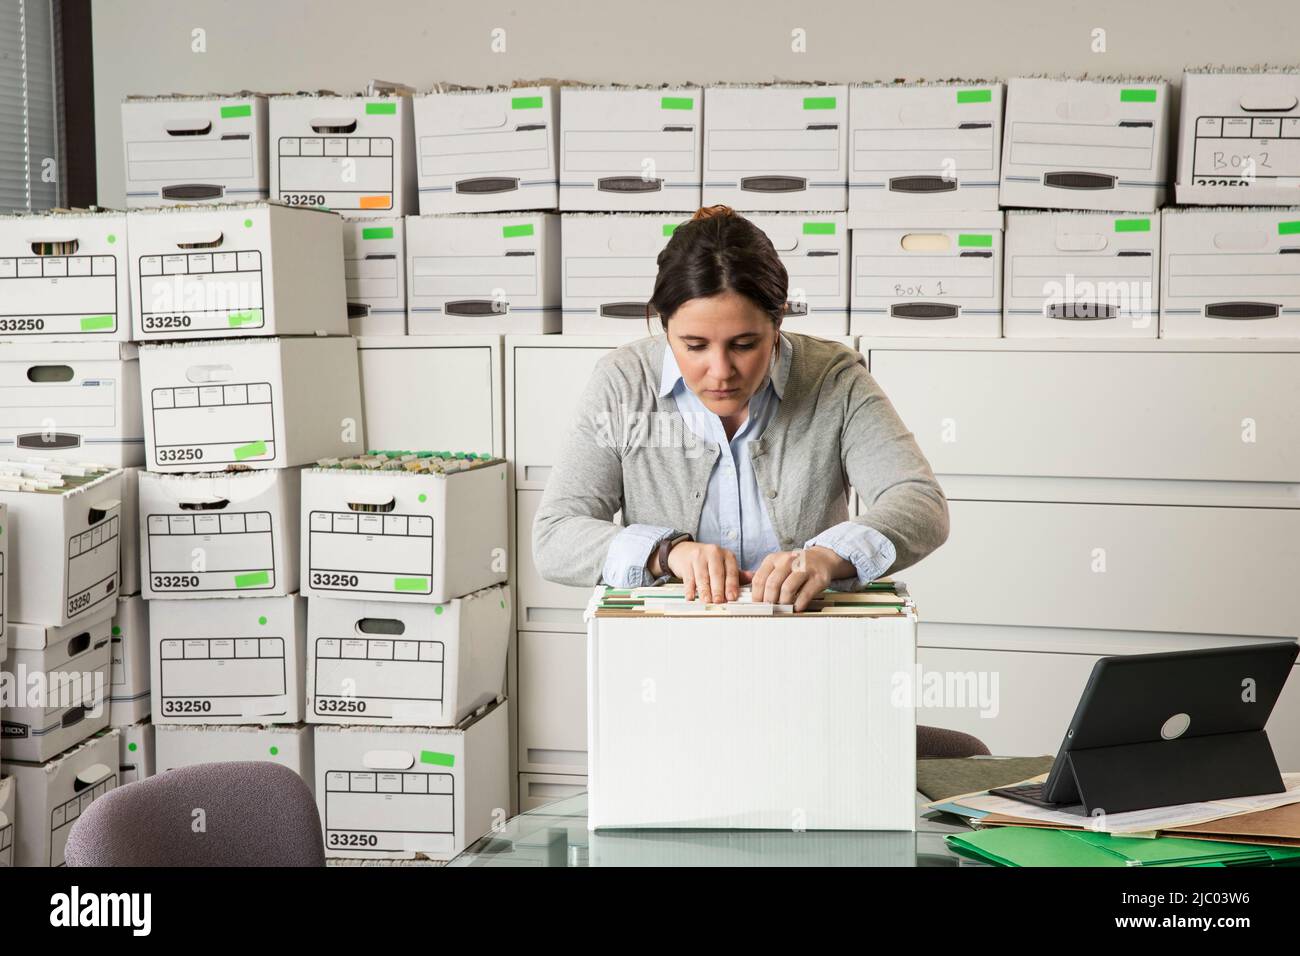 A woman looks through a box of files in an office Stock Photo